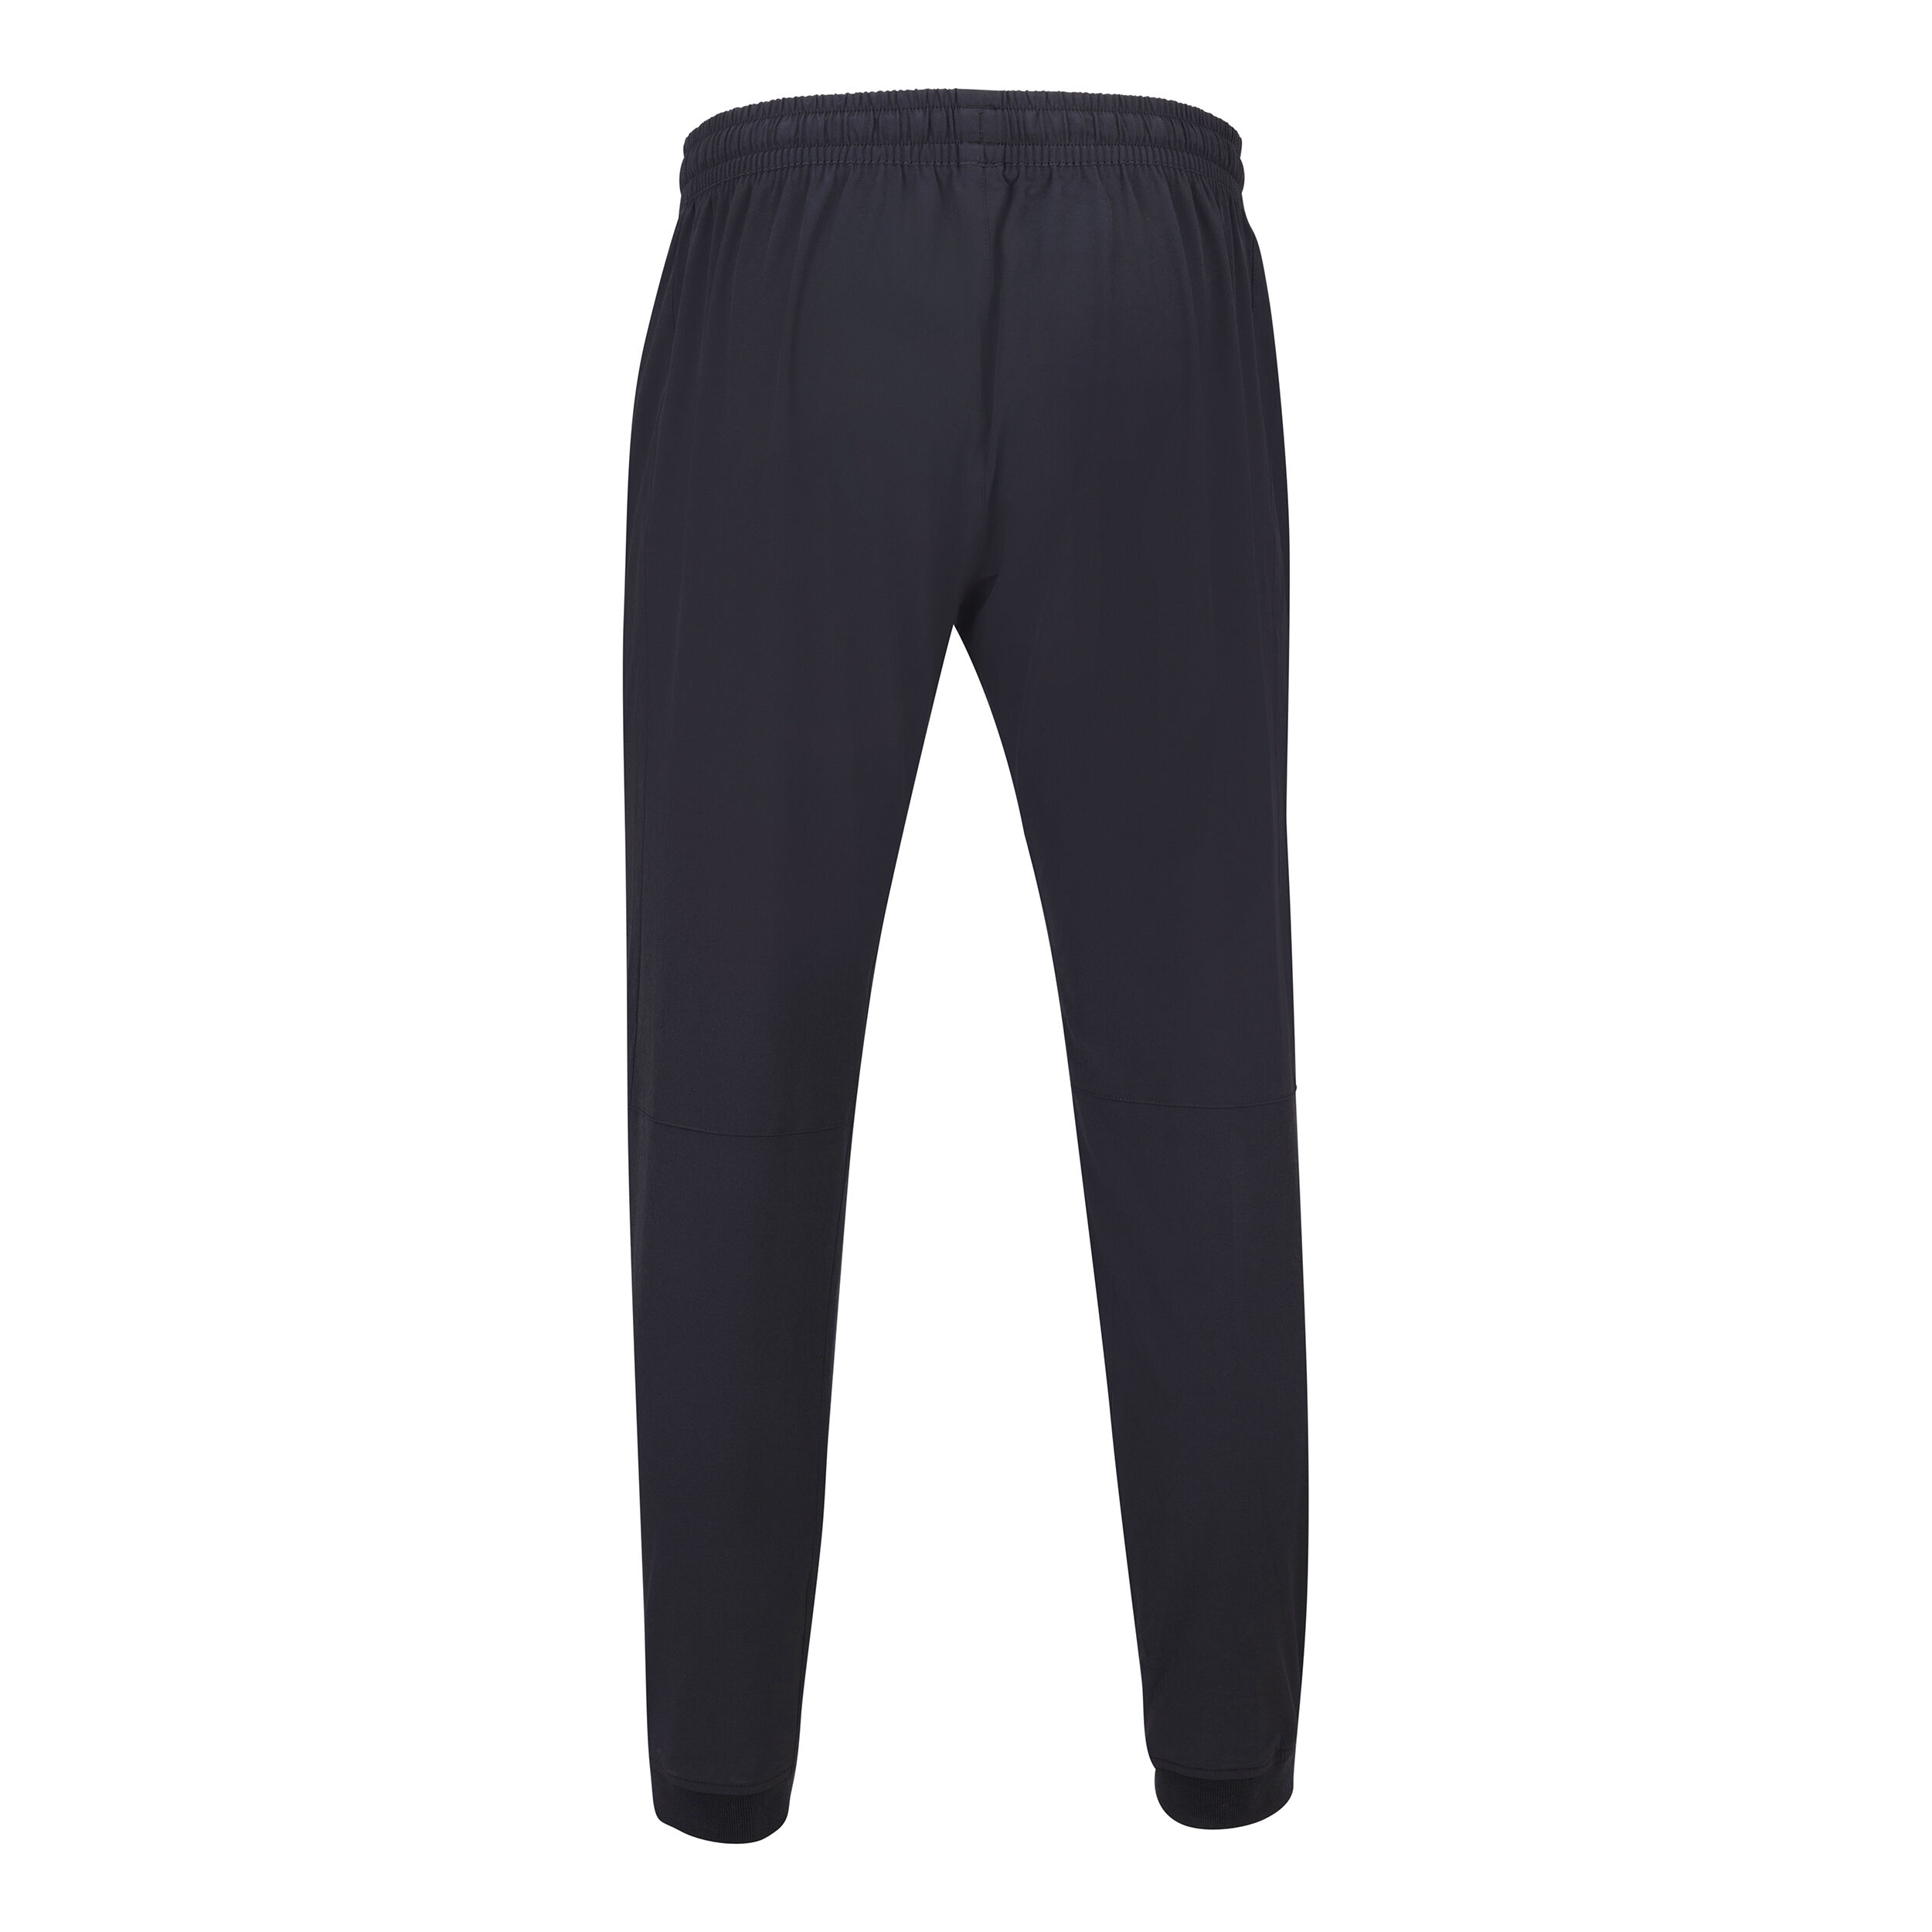 adidas Joggers & Track Pants sale - discounted price | FASHIOLA.in